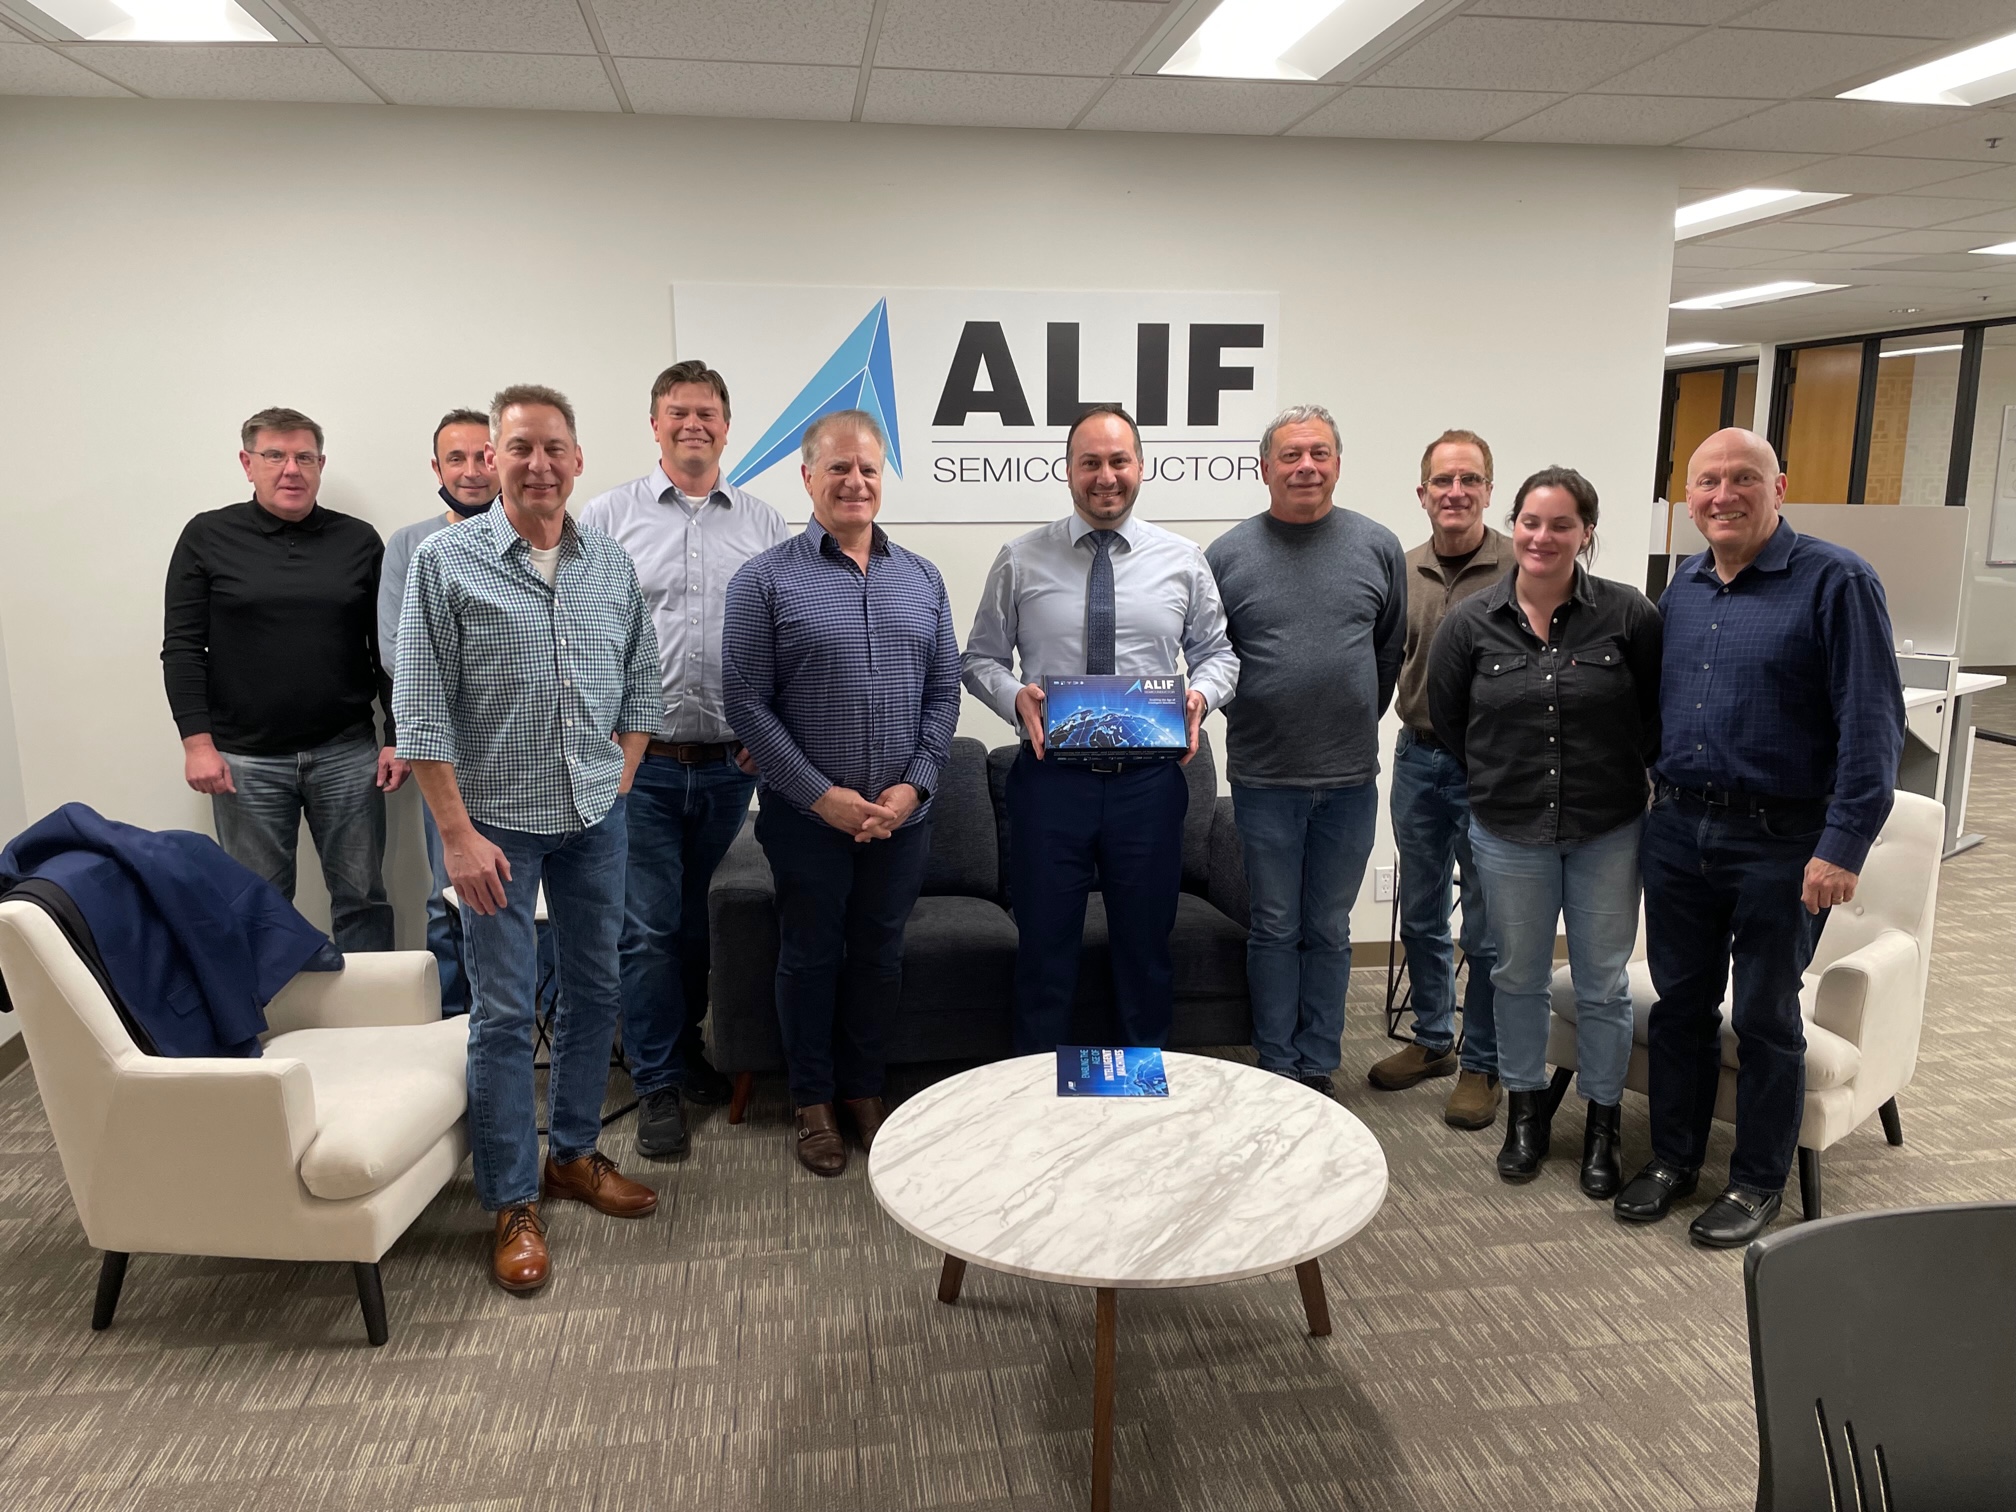 OQ and Alif Teams in Alif's Pleasanton office - California where the MoU was signed and OQ received its development kit